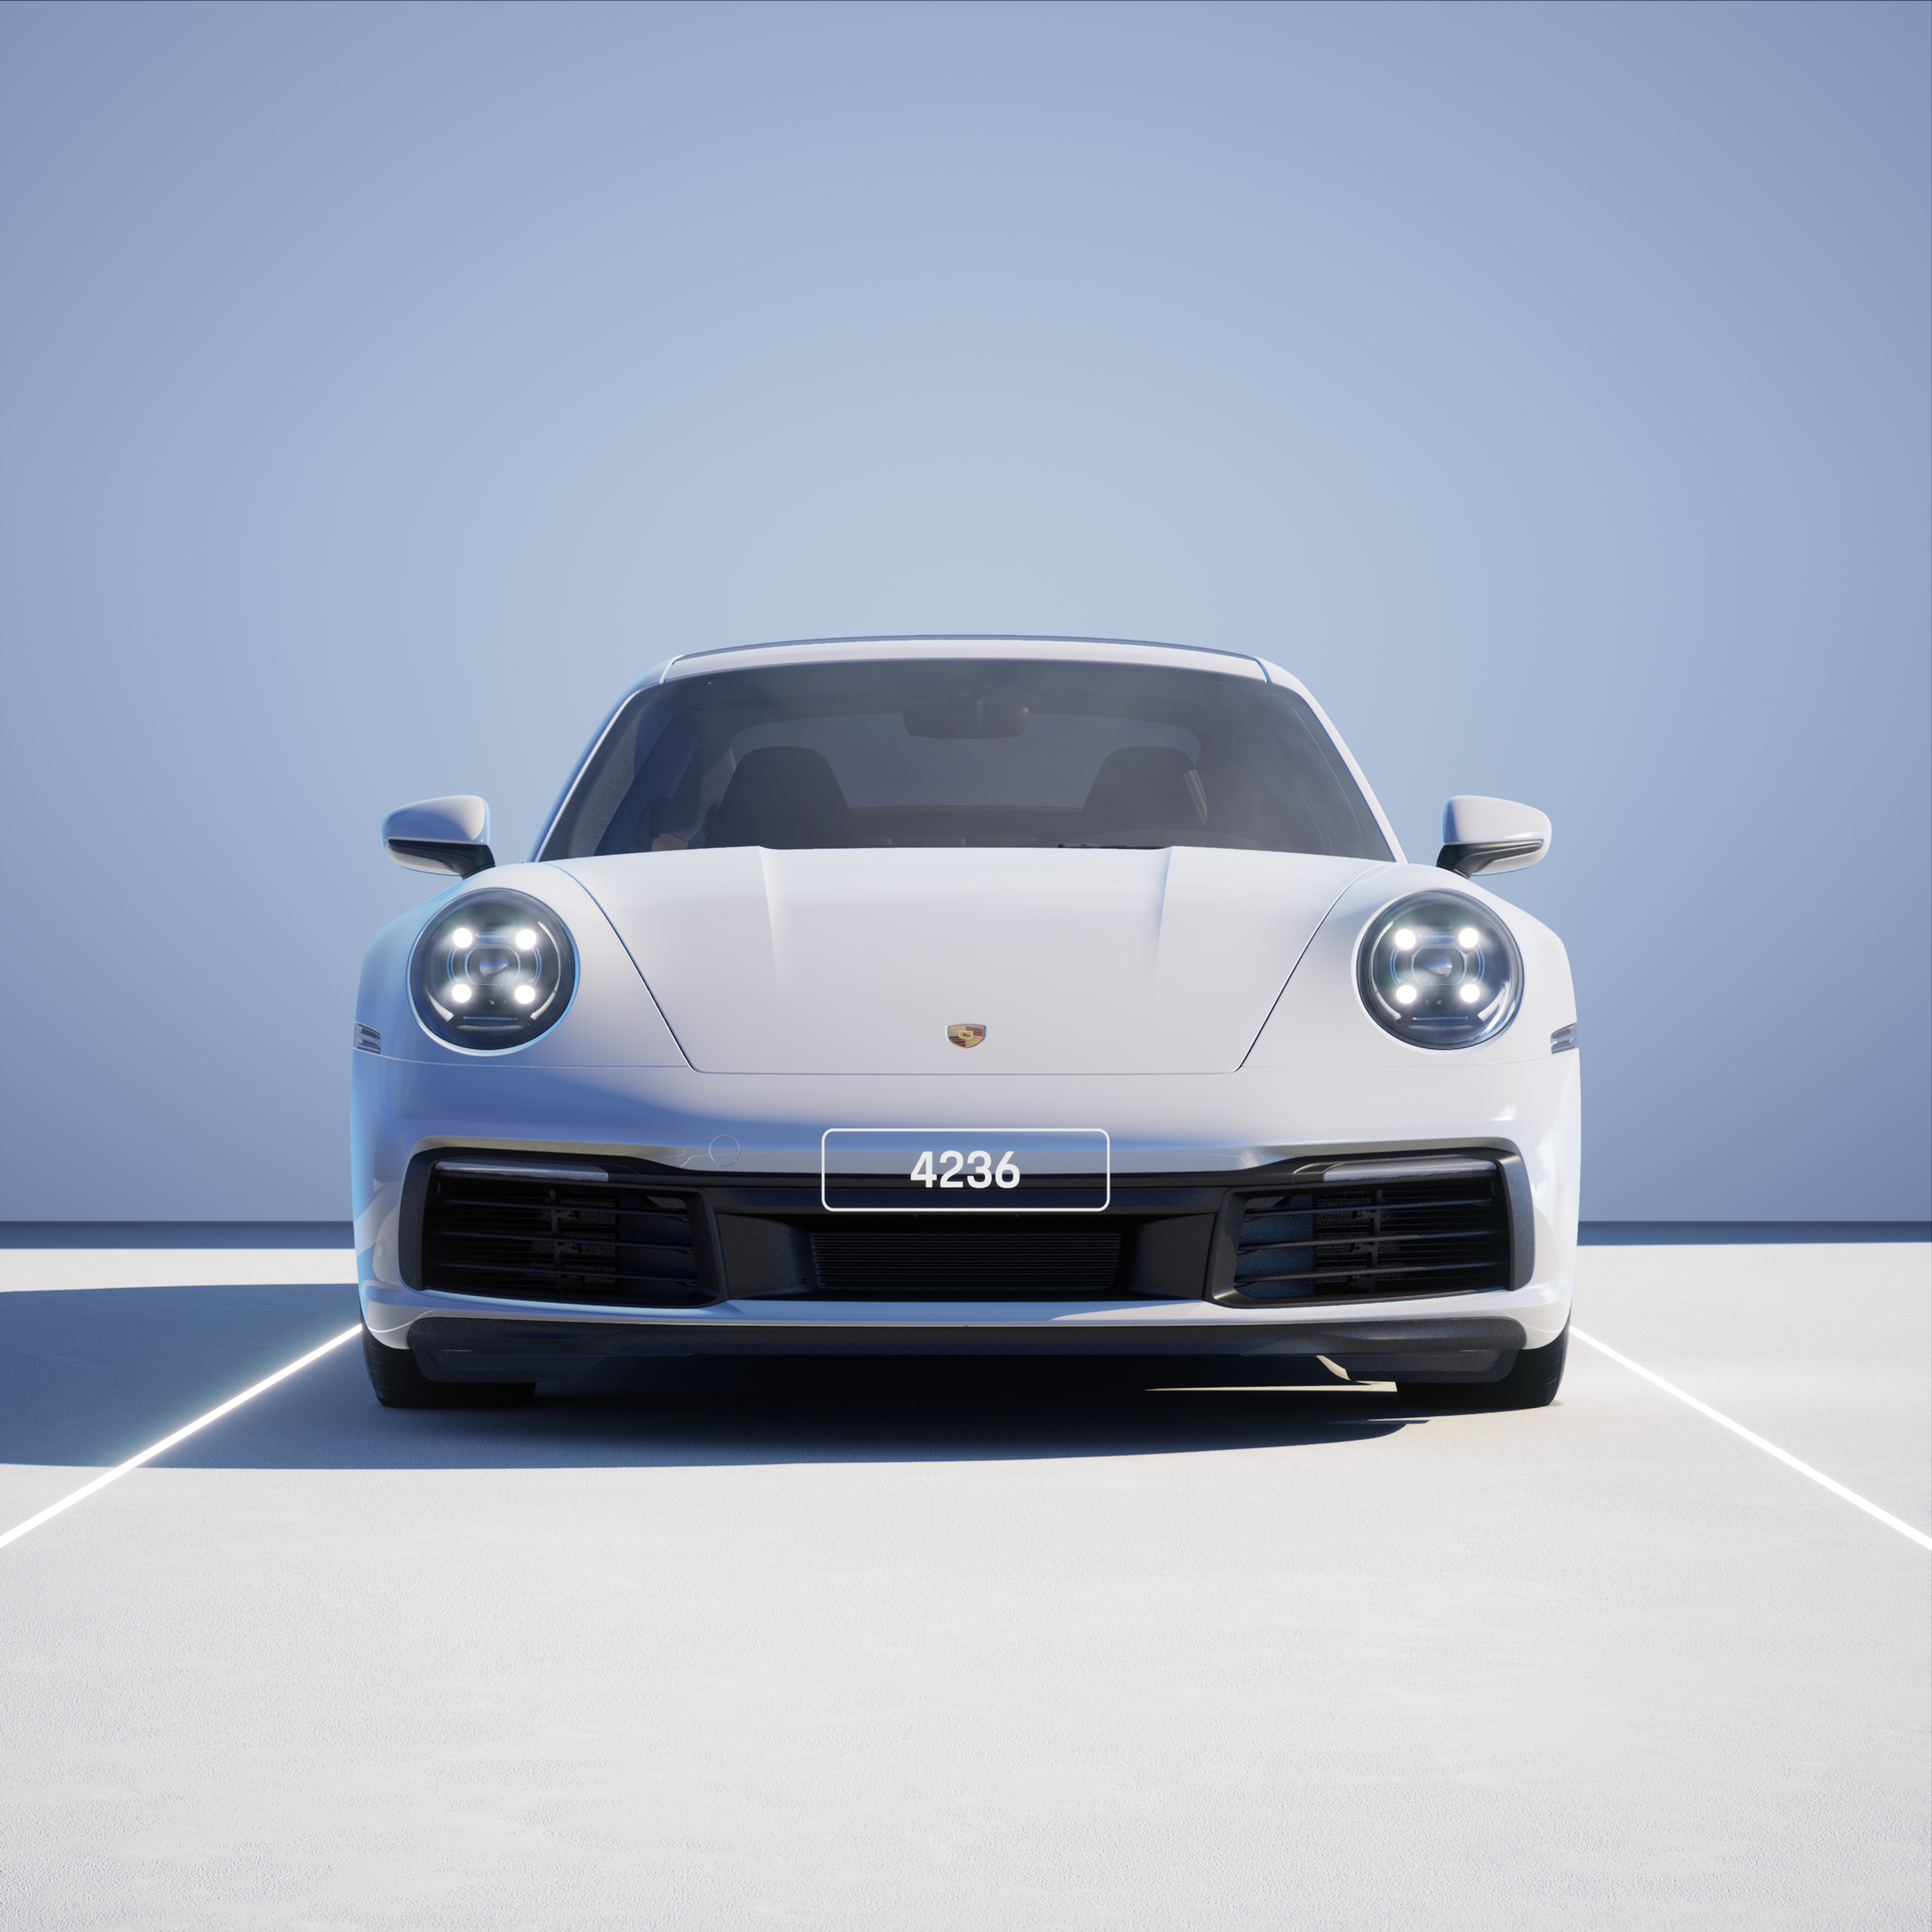 The PORSCHΞ 911 4236 image in phase